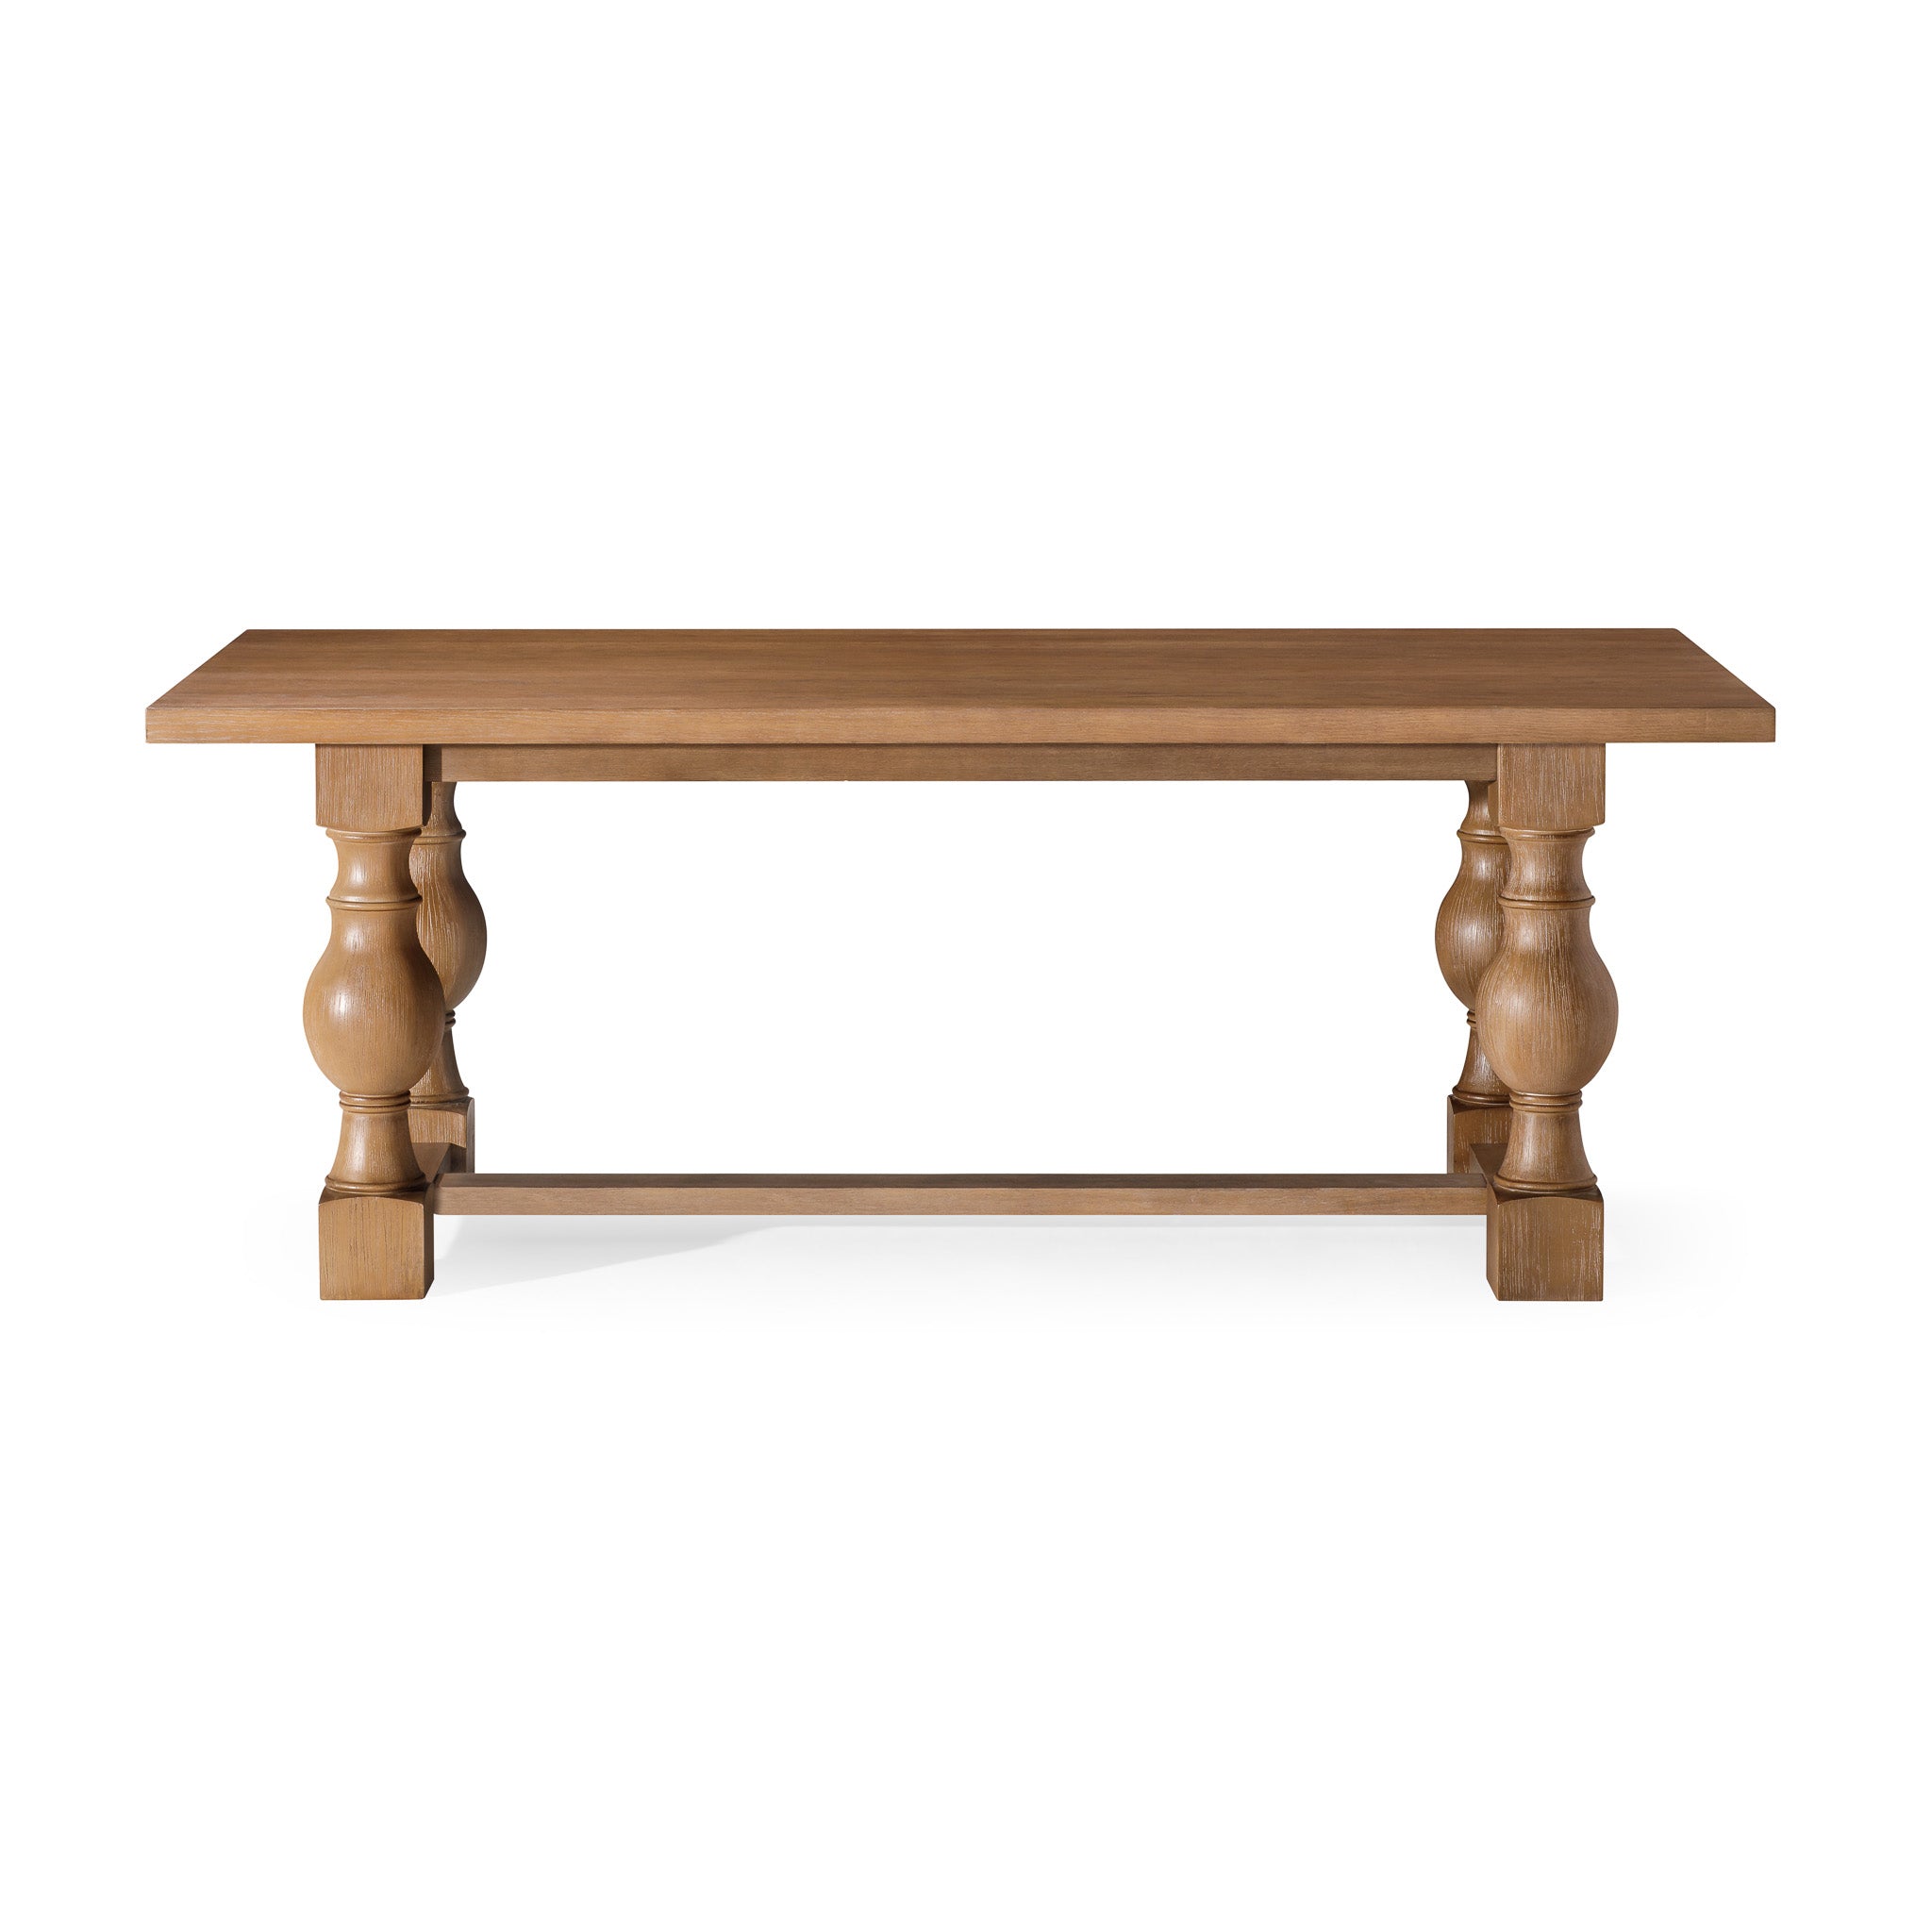 Leon Classical Wooden Dining Table in Antiqued Natural Finish in Dining Furniture by Maven Lane